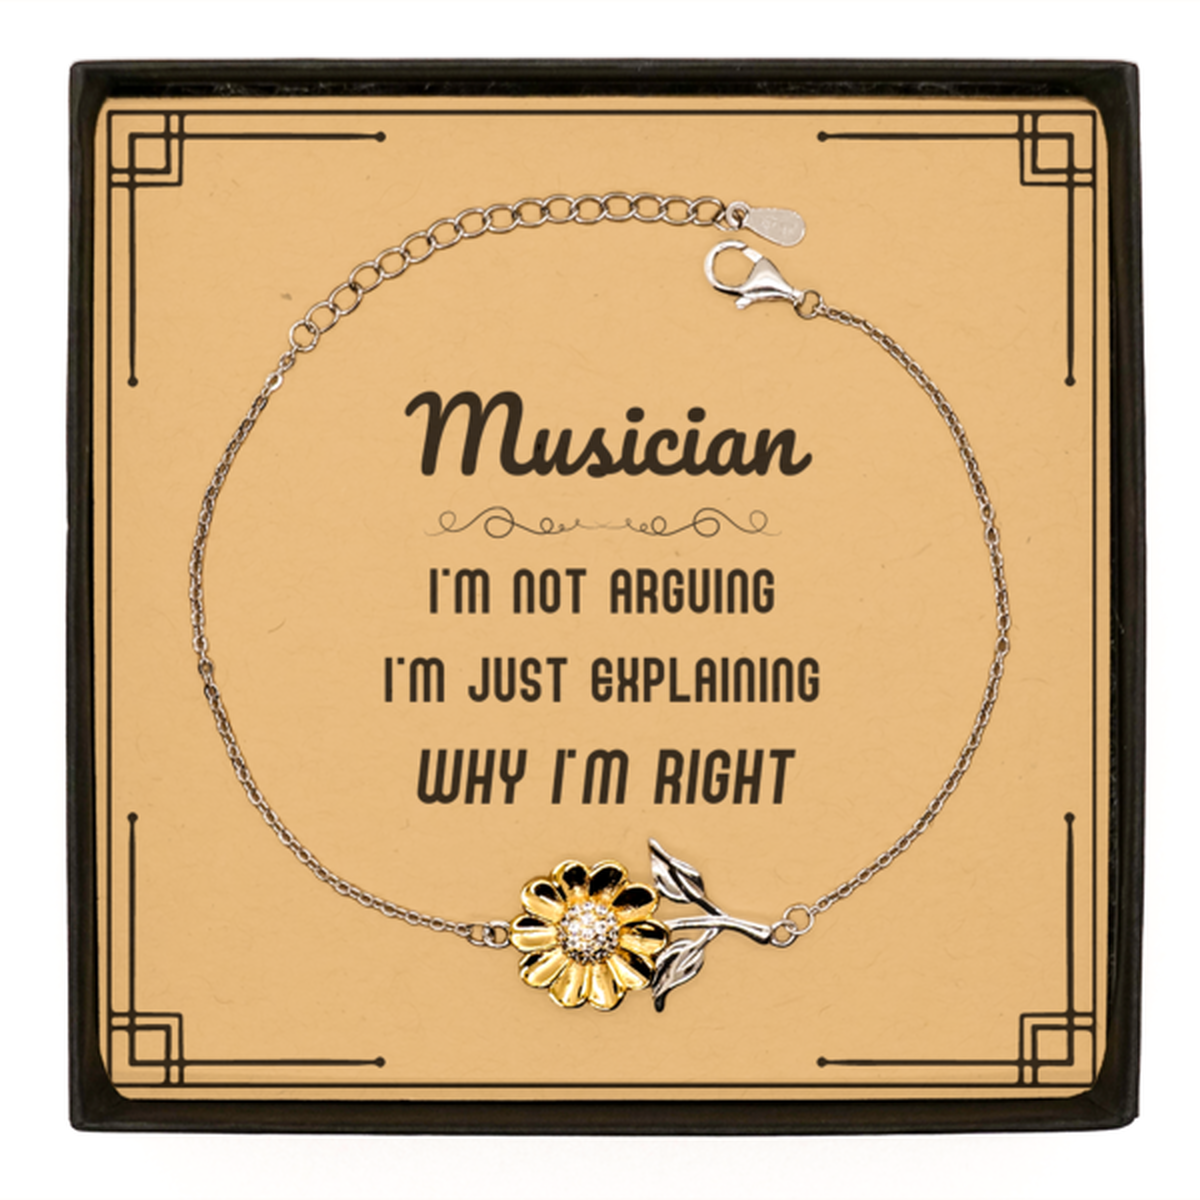 Musician I'm not Arguing. I'm Just Explaining Why I'm RIGHT Sunflower Bracelet, Funny Saying Quote Musician Gifts For Musician Message Card Graduation Birthday Christmas Gifts for Men Women Coworker